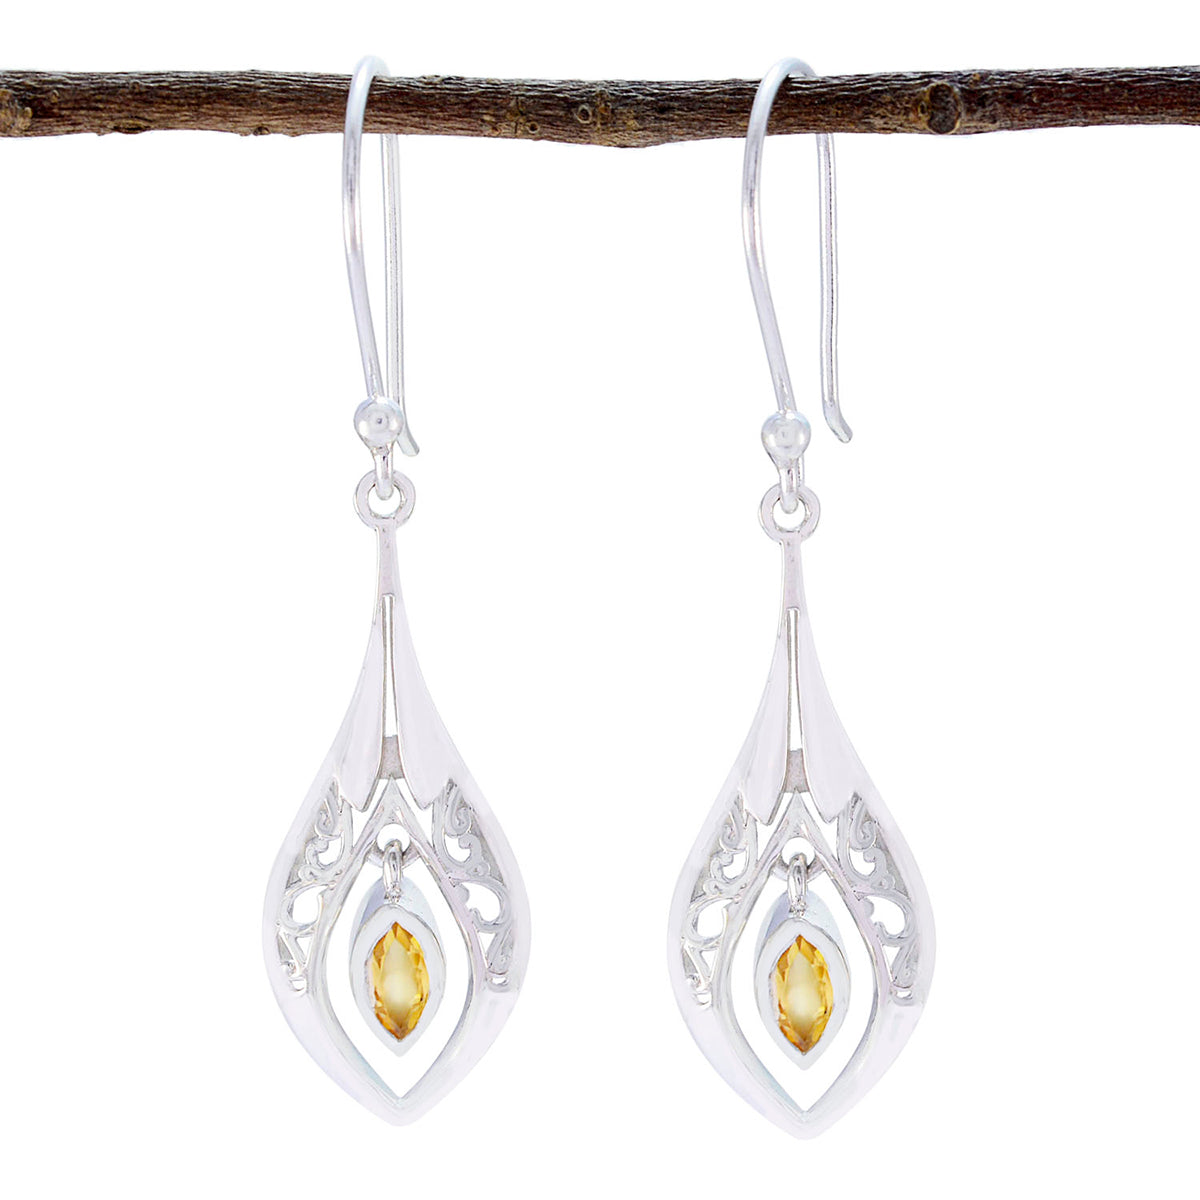 Riyo Good Gemstones Marquise Faceted Yellow Citrine Silver Earrings mother's day gift